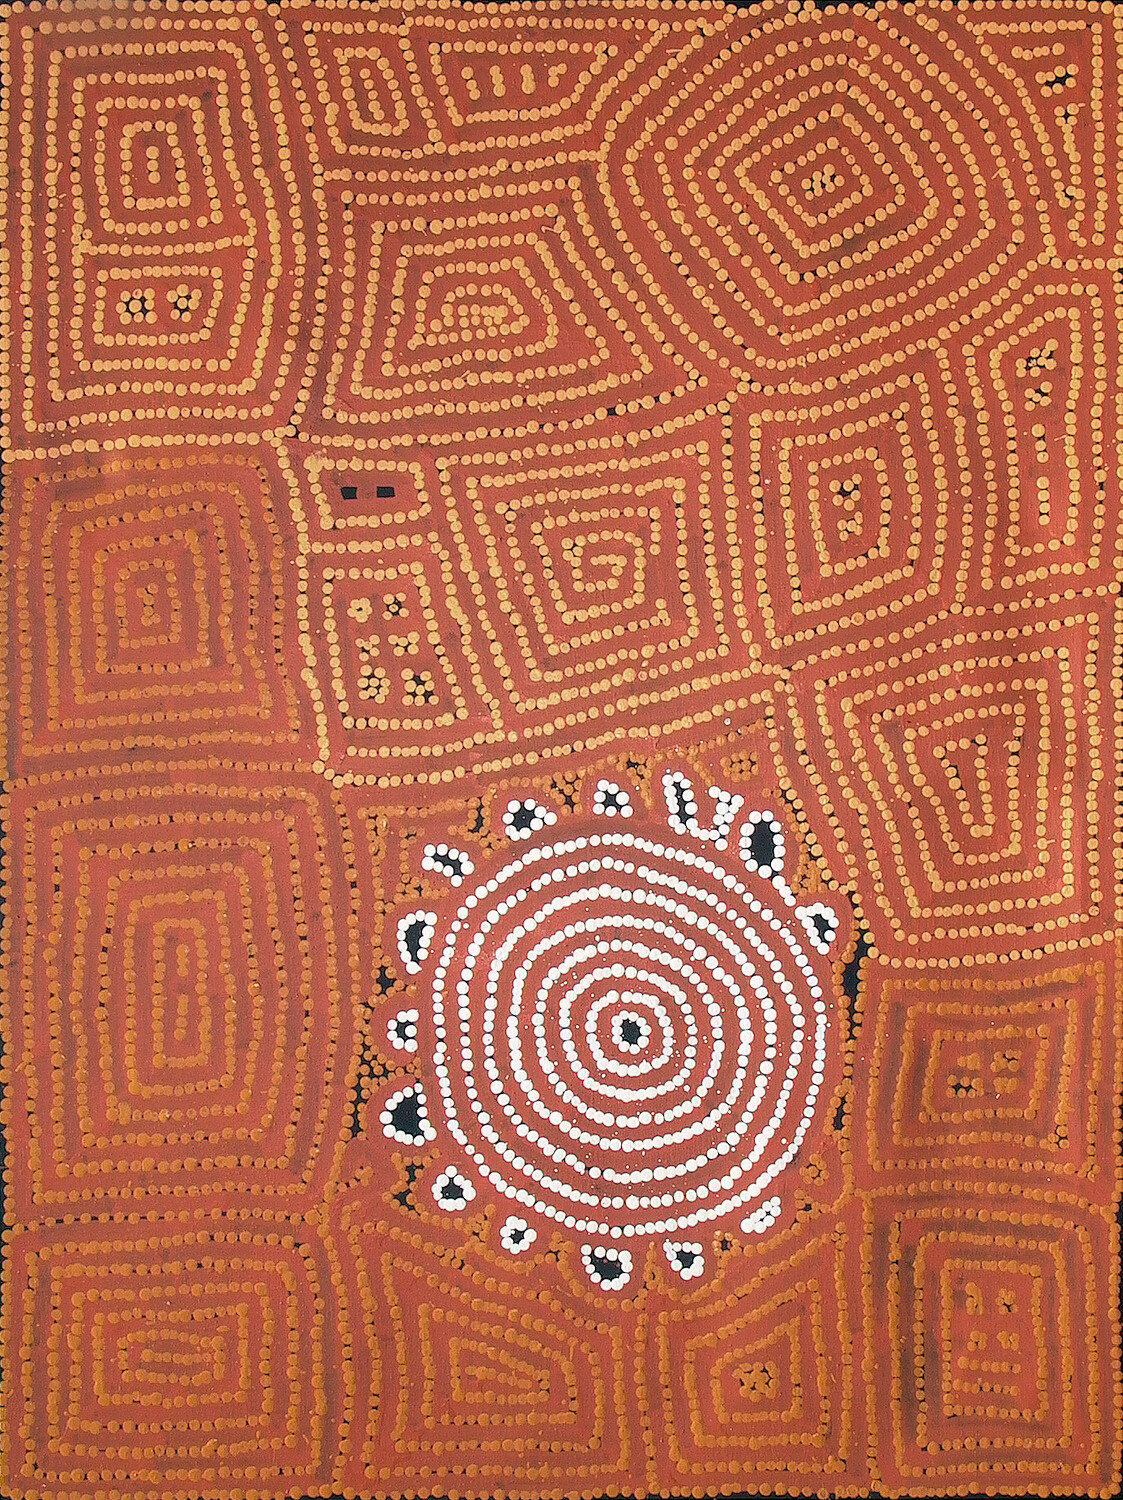 Malliera Ceremonies (2005) by Barney Campbell Tjakamarra 122x91cm Cat 9353BC